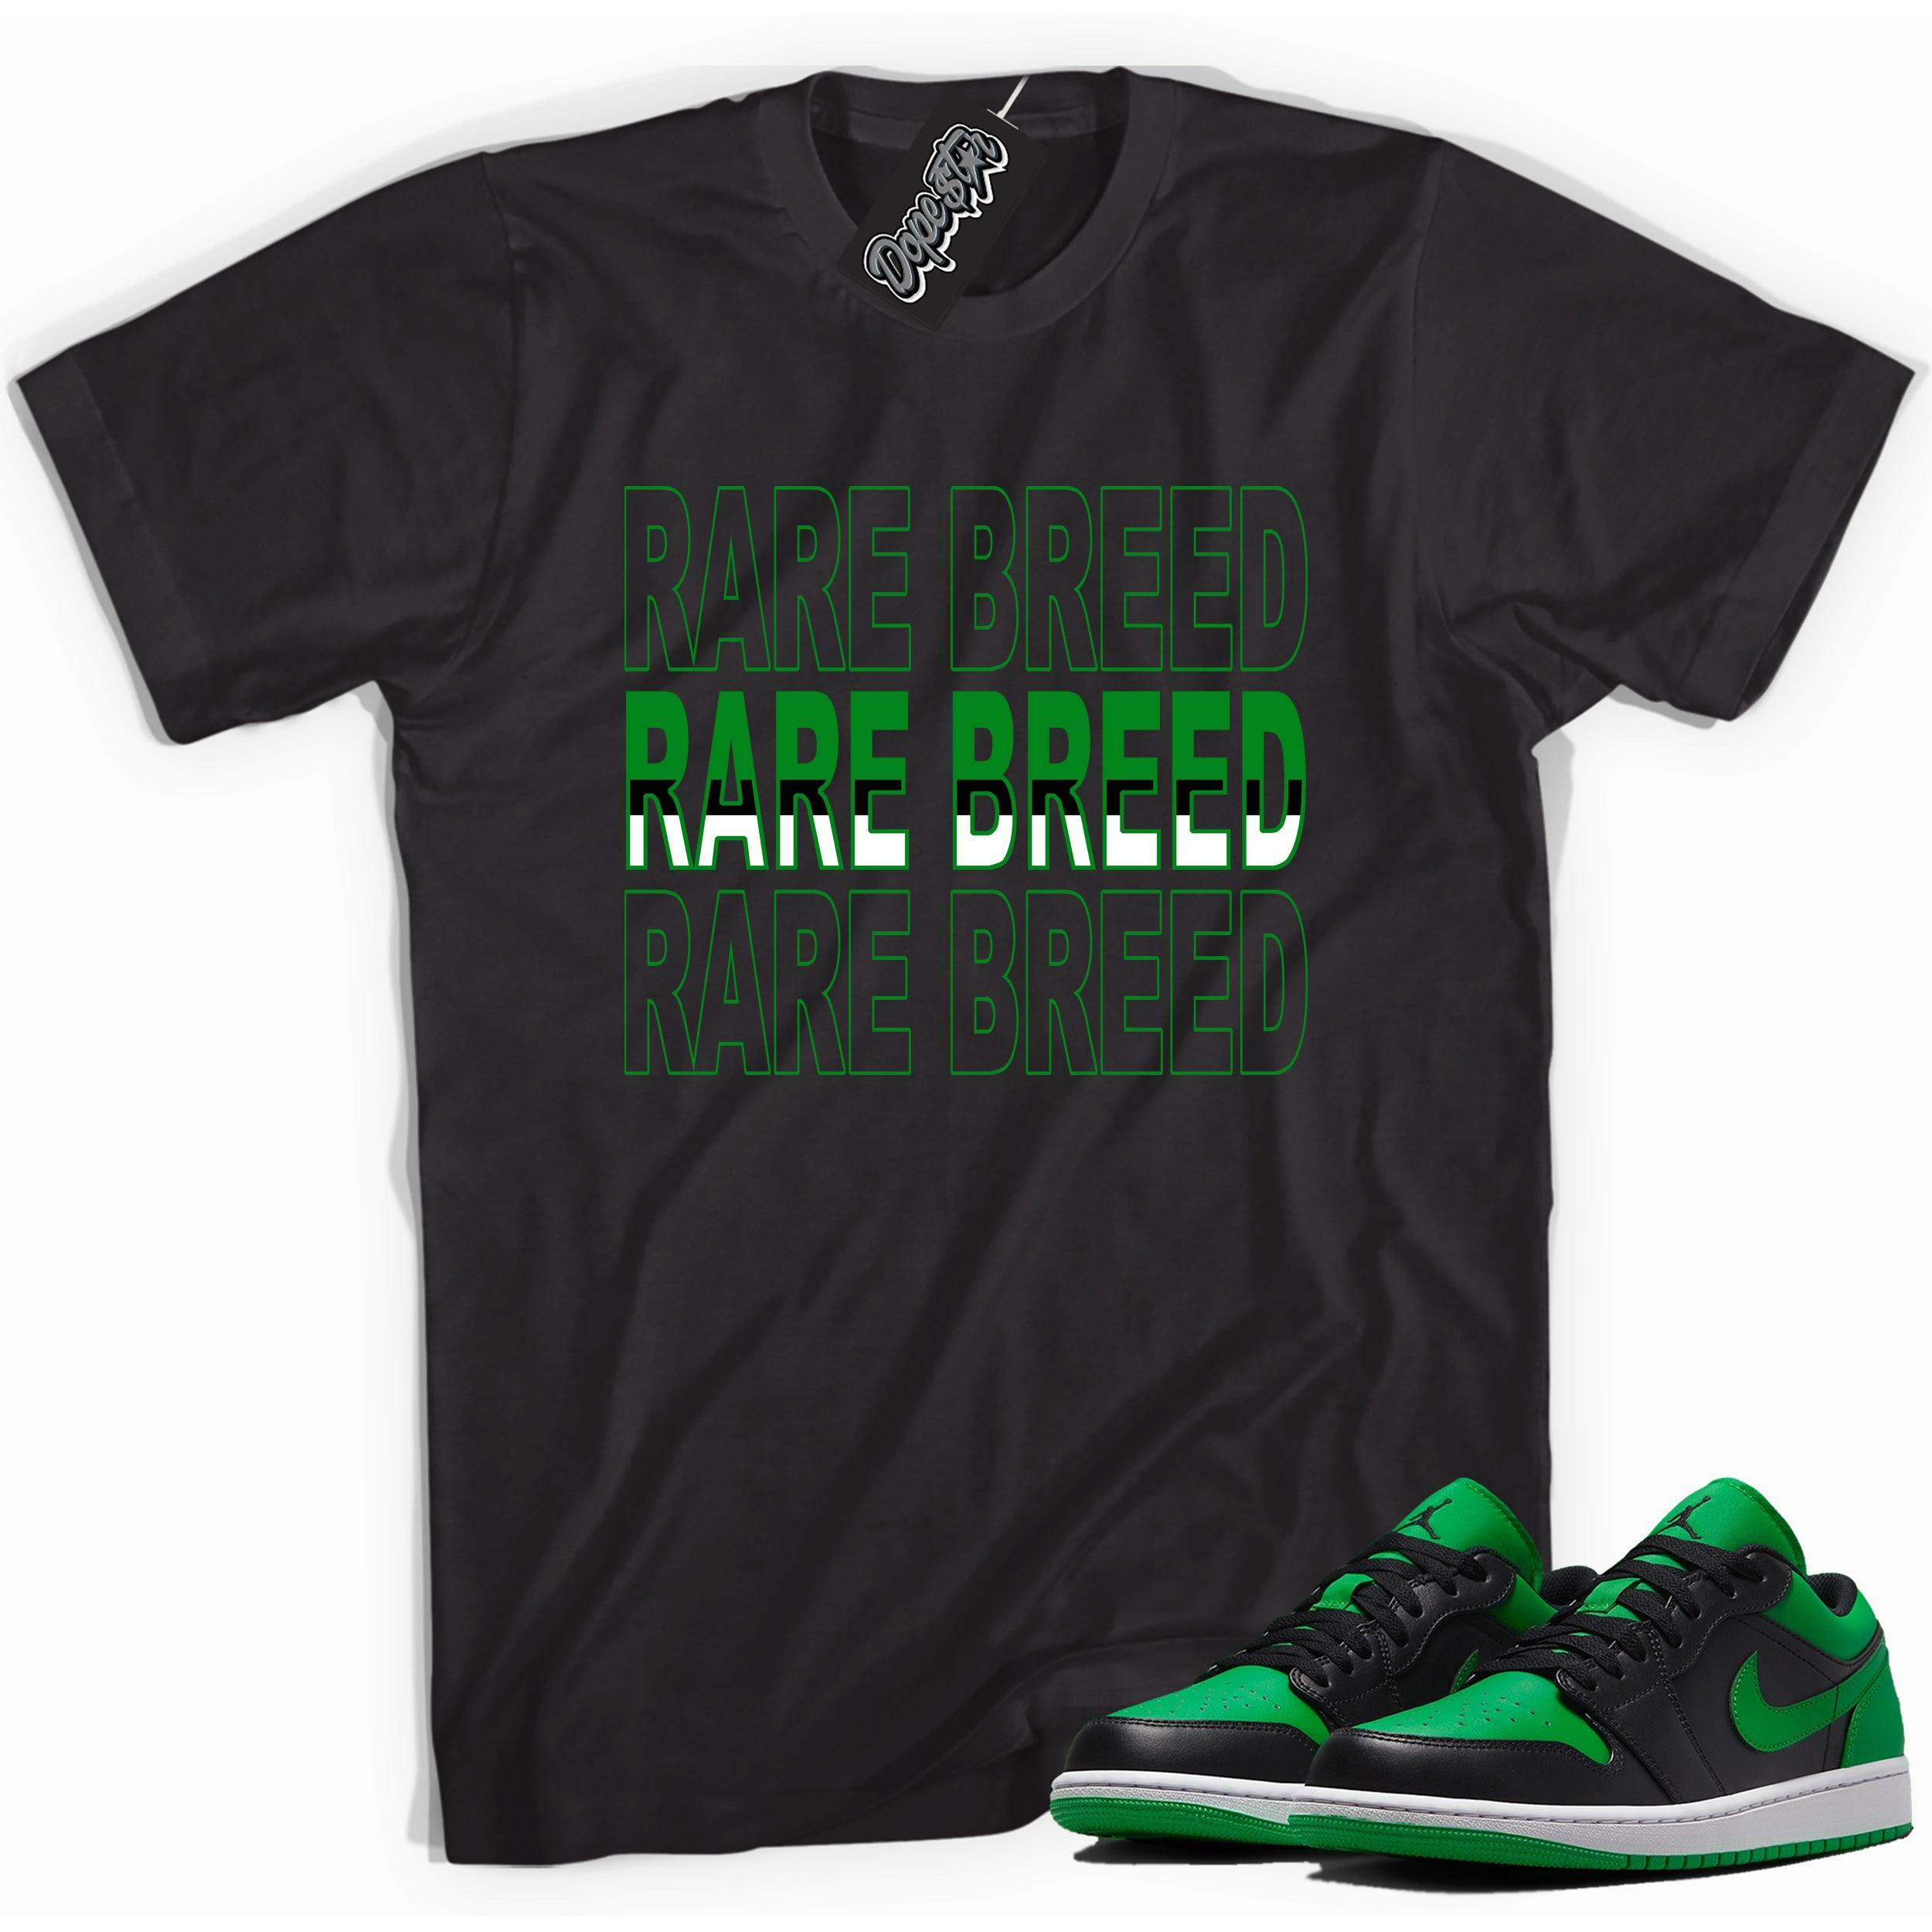 Cool black graphic tee with 'rare breed' print, that perfectly matches Air Jordan 1 Low Lucky Green sneakers